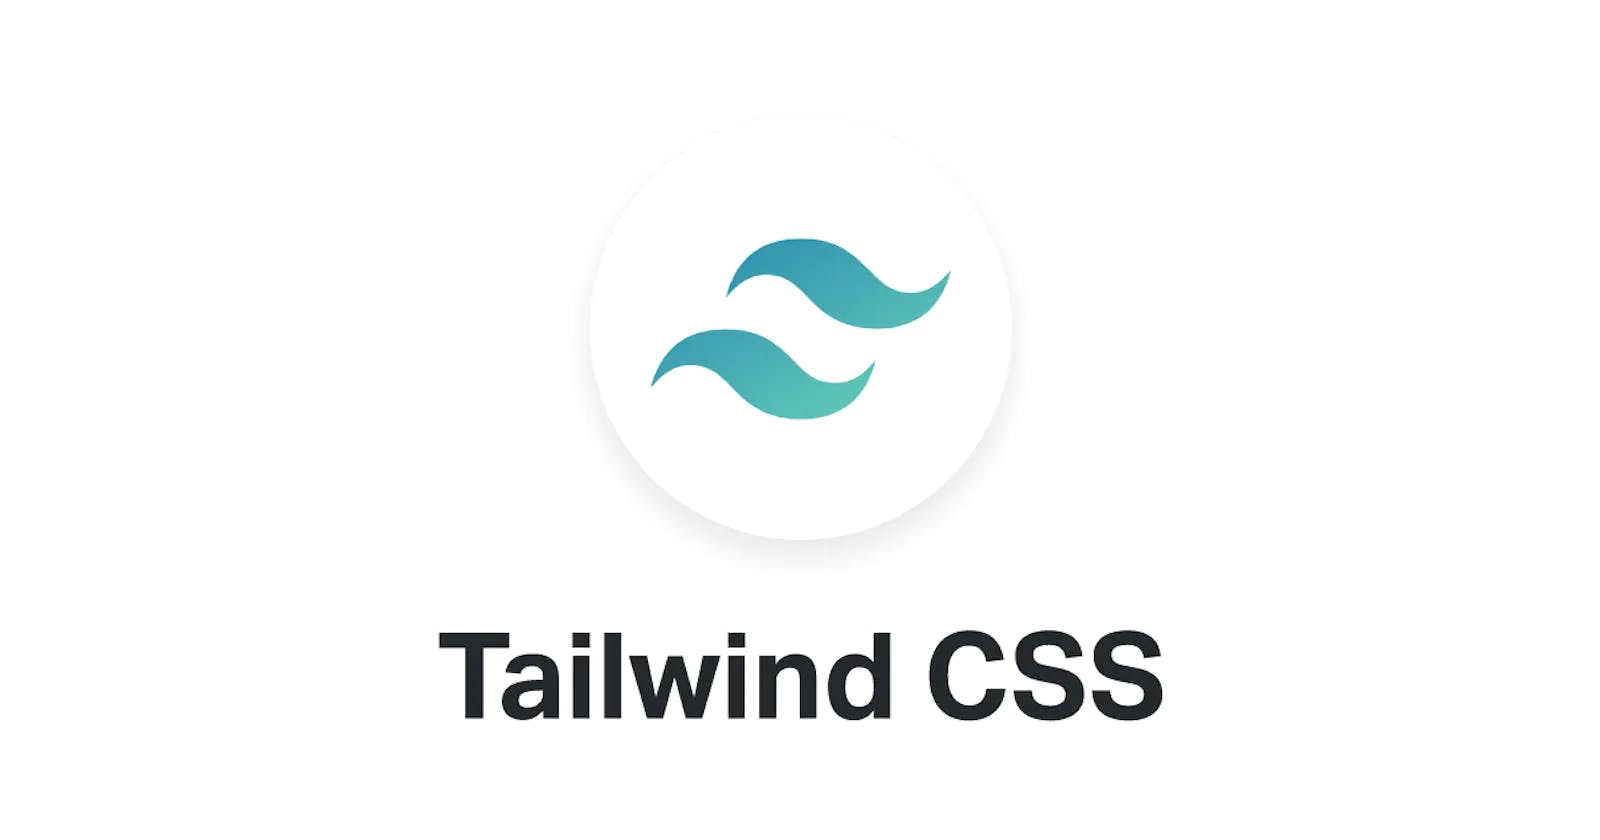 Getting Started with TailwindCSS - 
Let's start